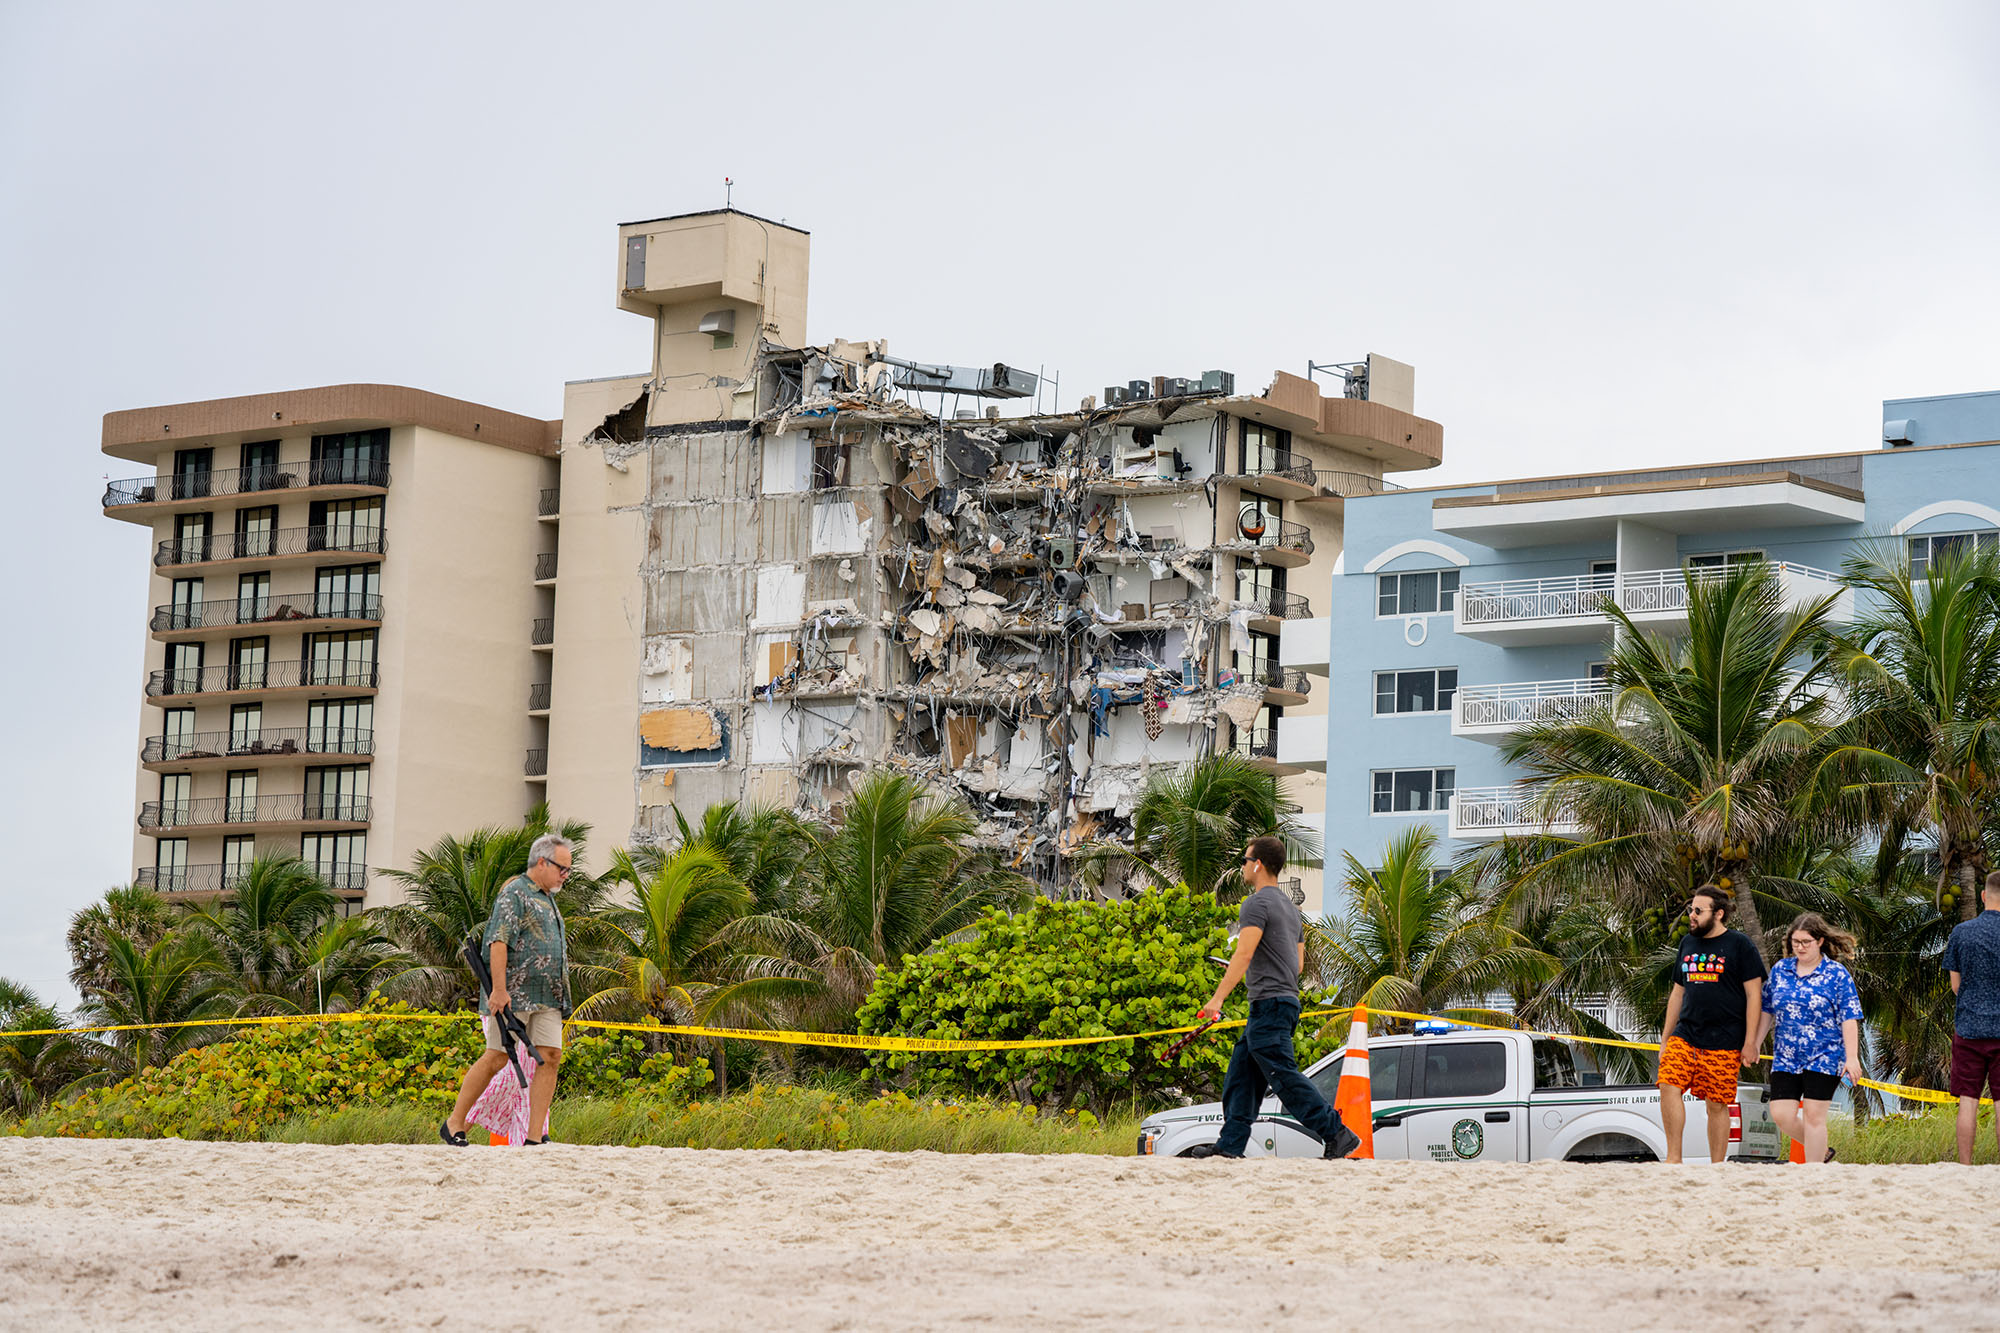 Miami Beach, FL, USA - June 24, 2021: aftermath of the Champlain Towers collapse this morning showing building rubble